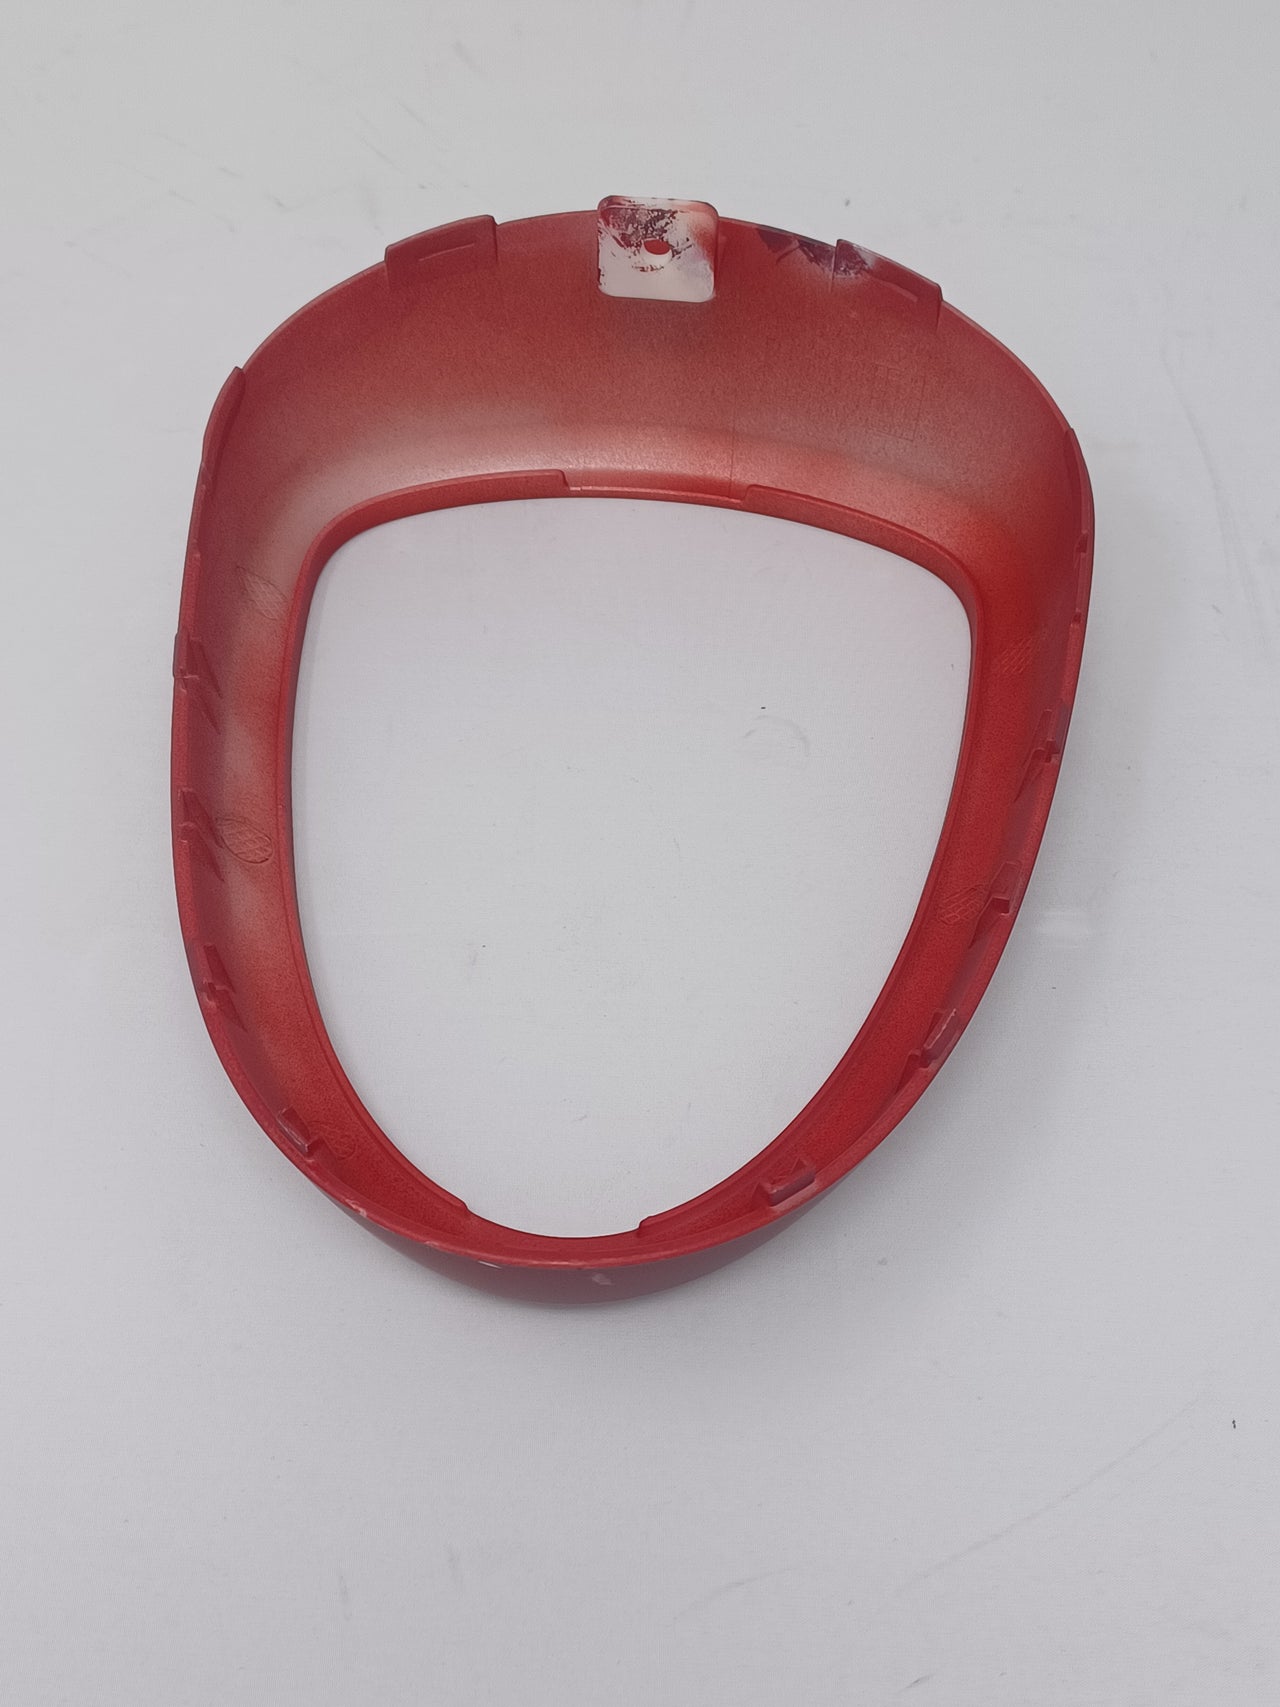 50cc Roma Scooter	Speedometer Upper Cover -- Red	53207-S9E1-0000